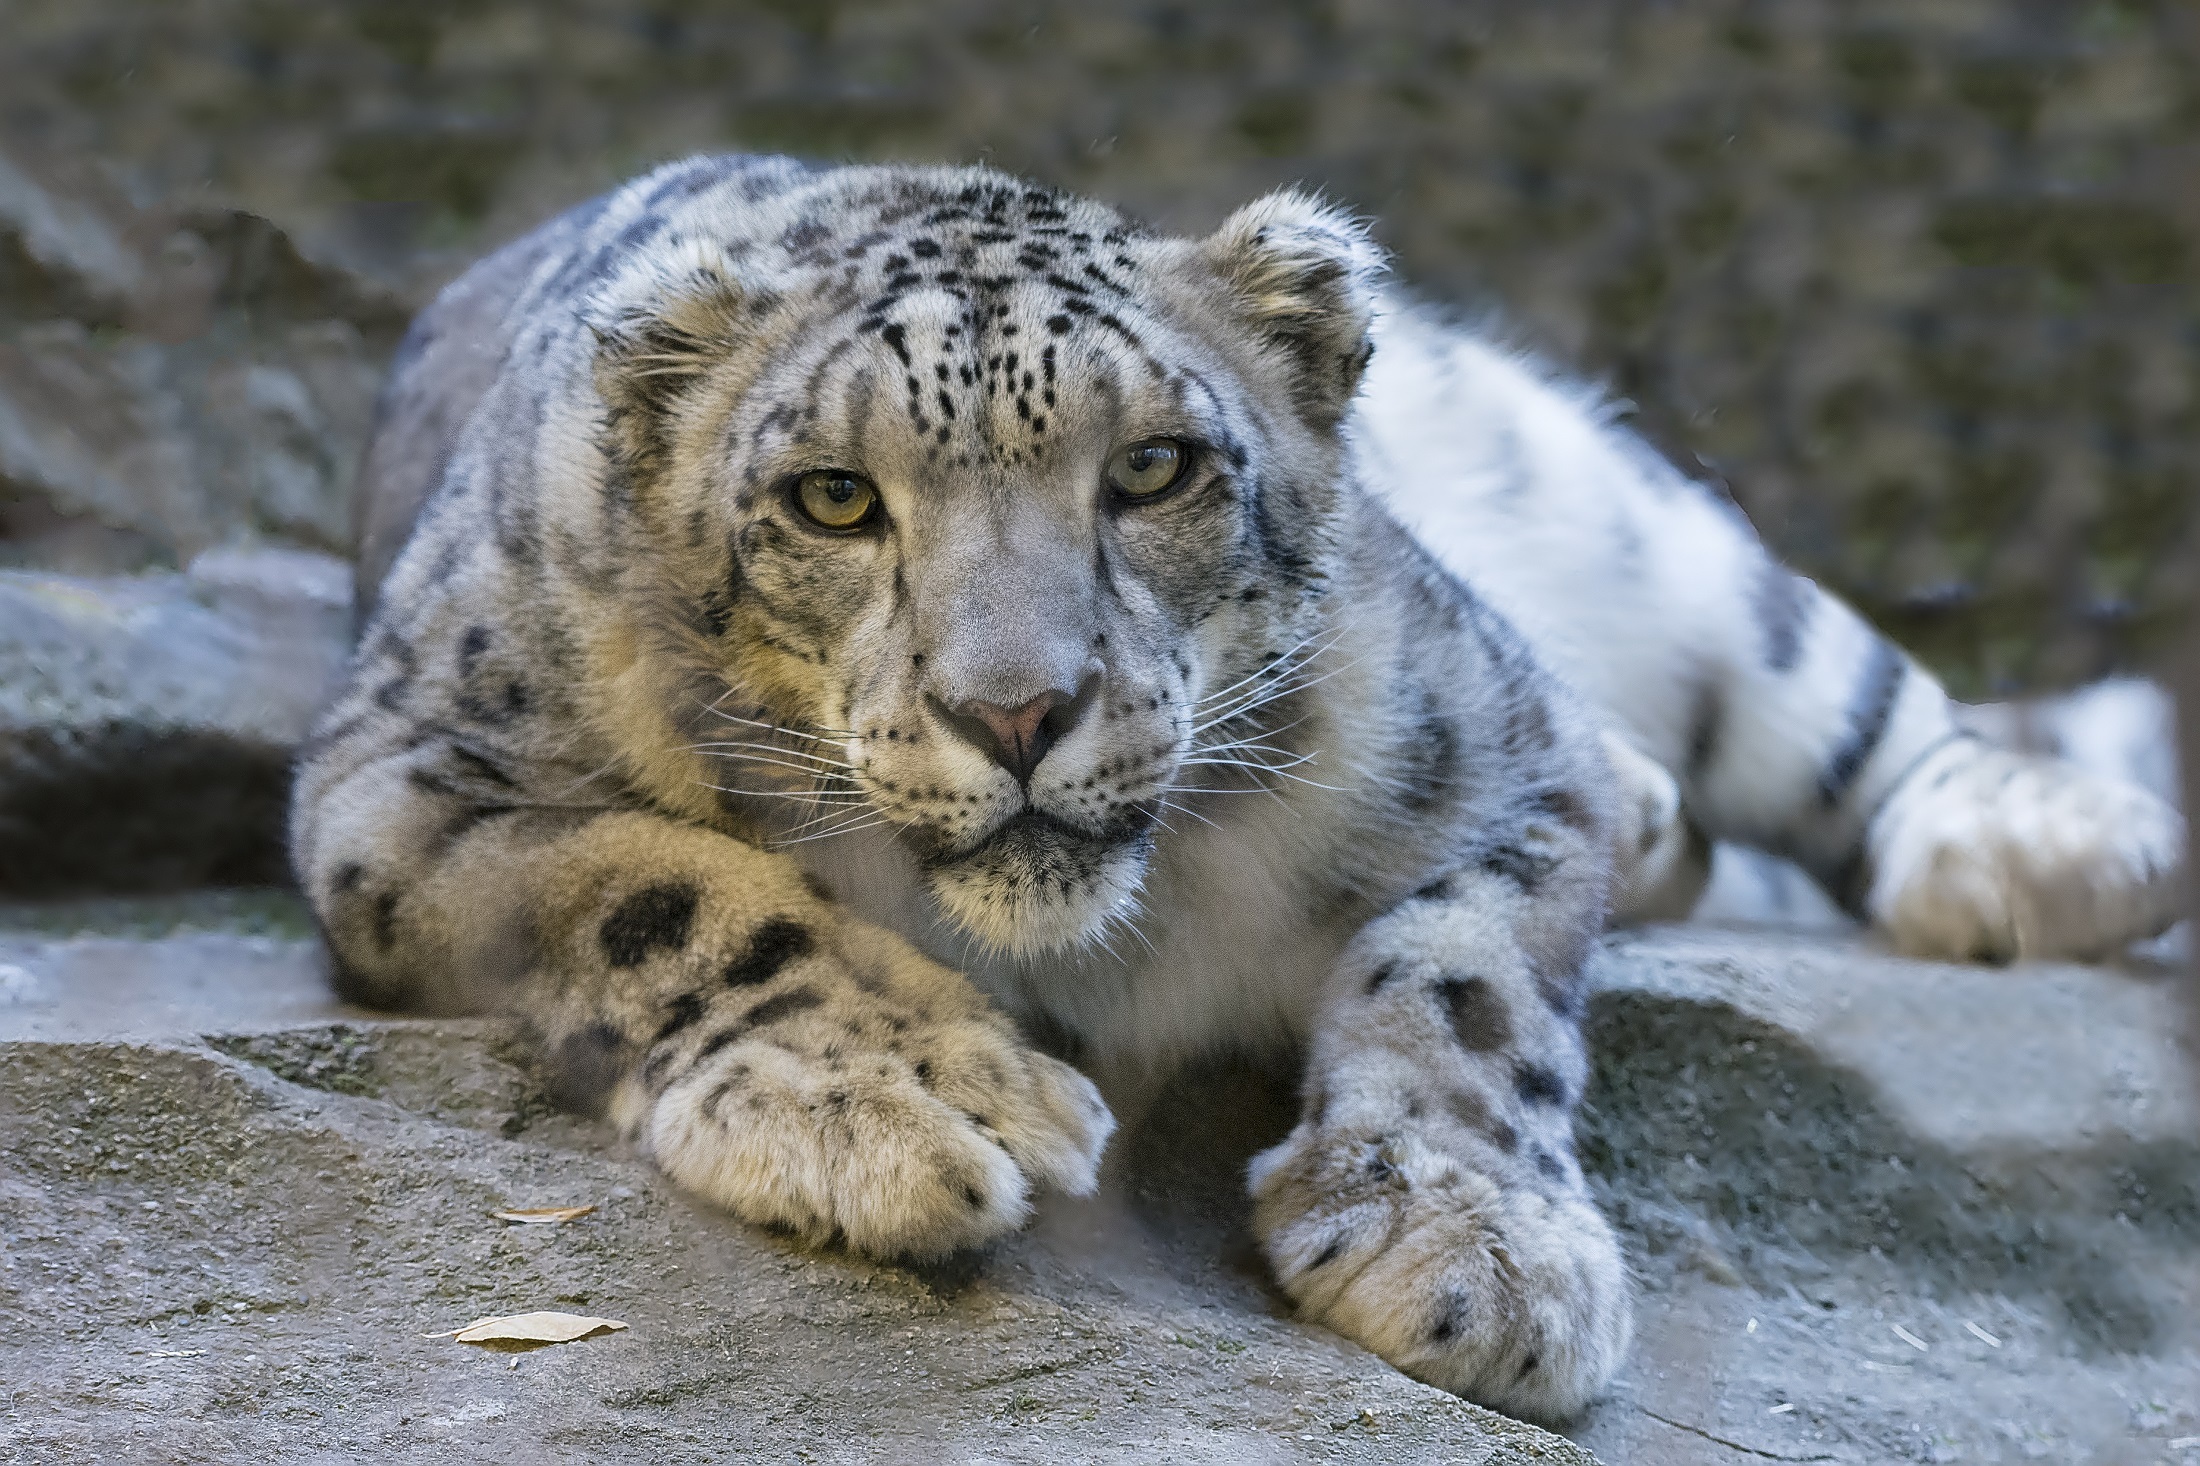 76312 download wallpaper animals, snow leopard, predator, big cat, sight, opinion screensavers and pictures for free